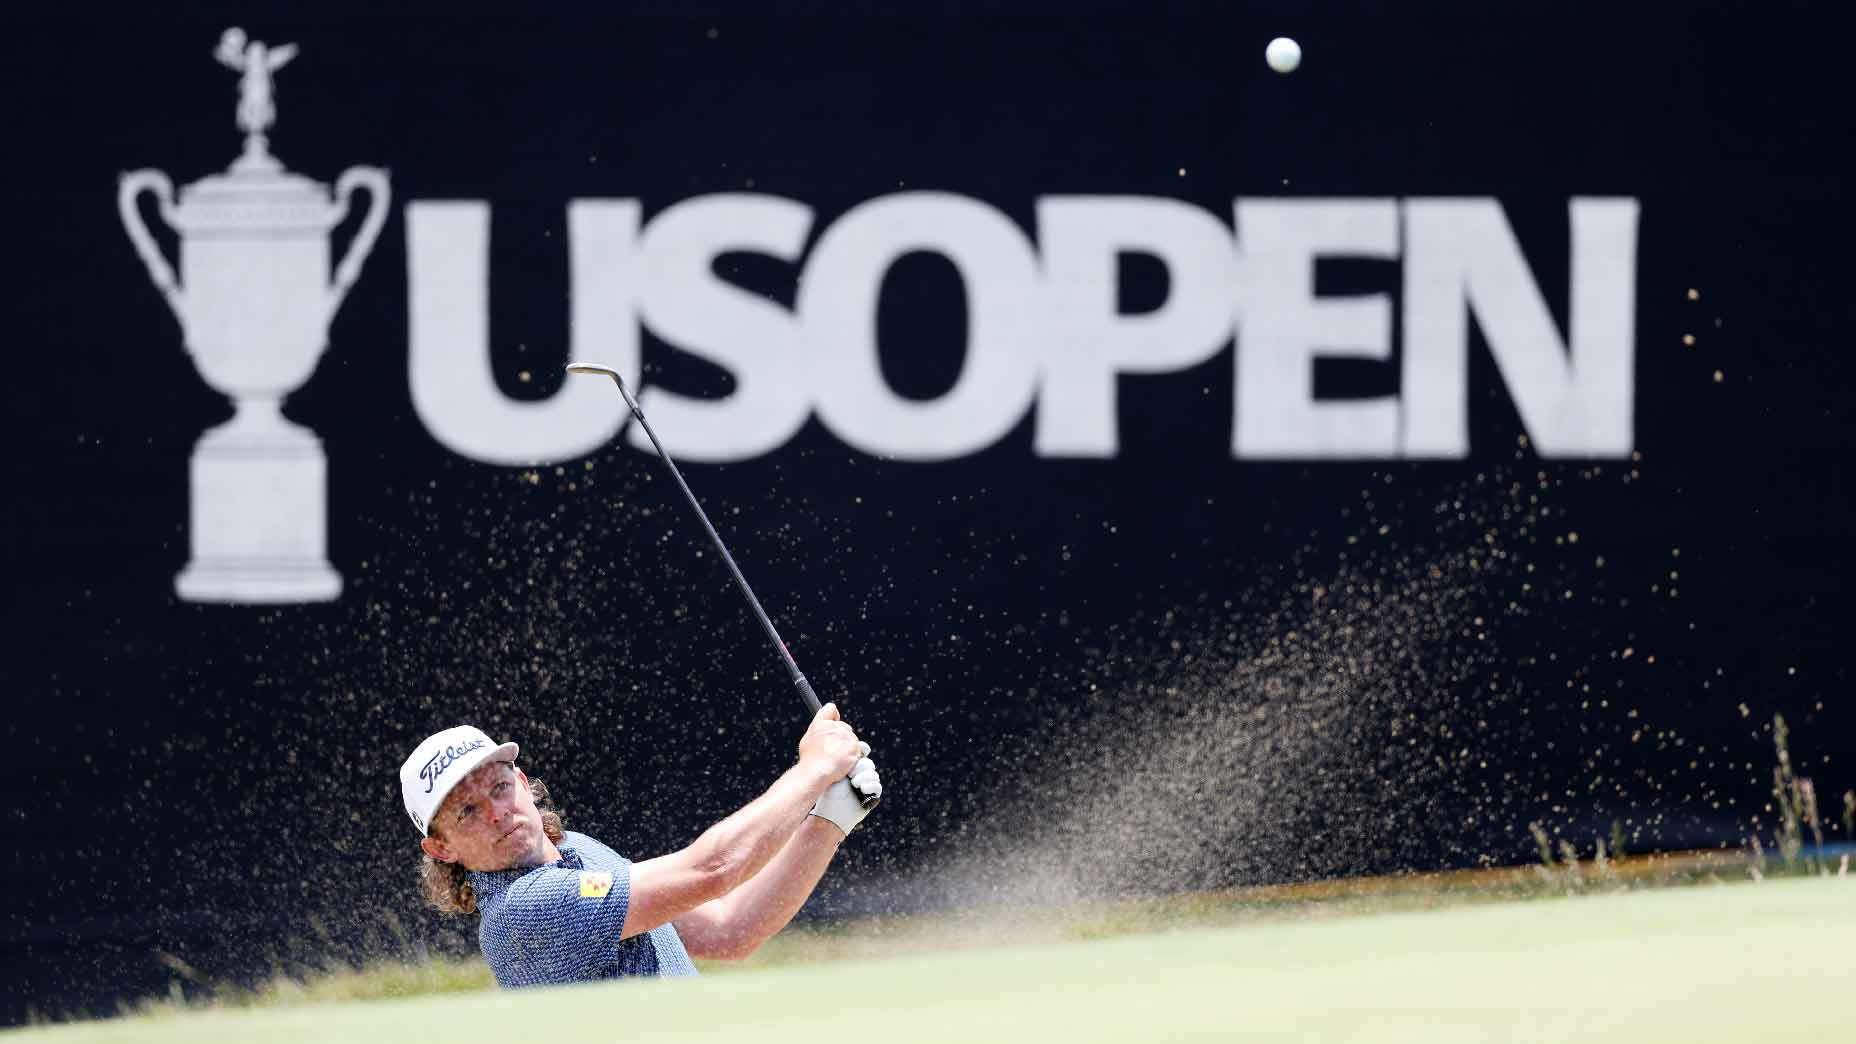 2023 U.S. Open Tee times, TV schedule, streaming, how to watch